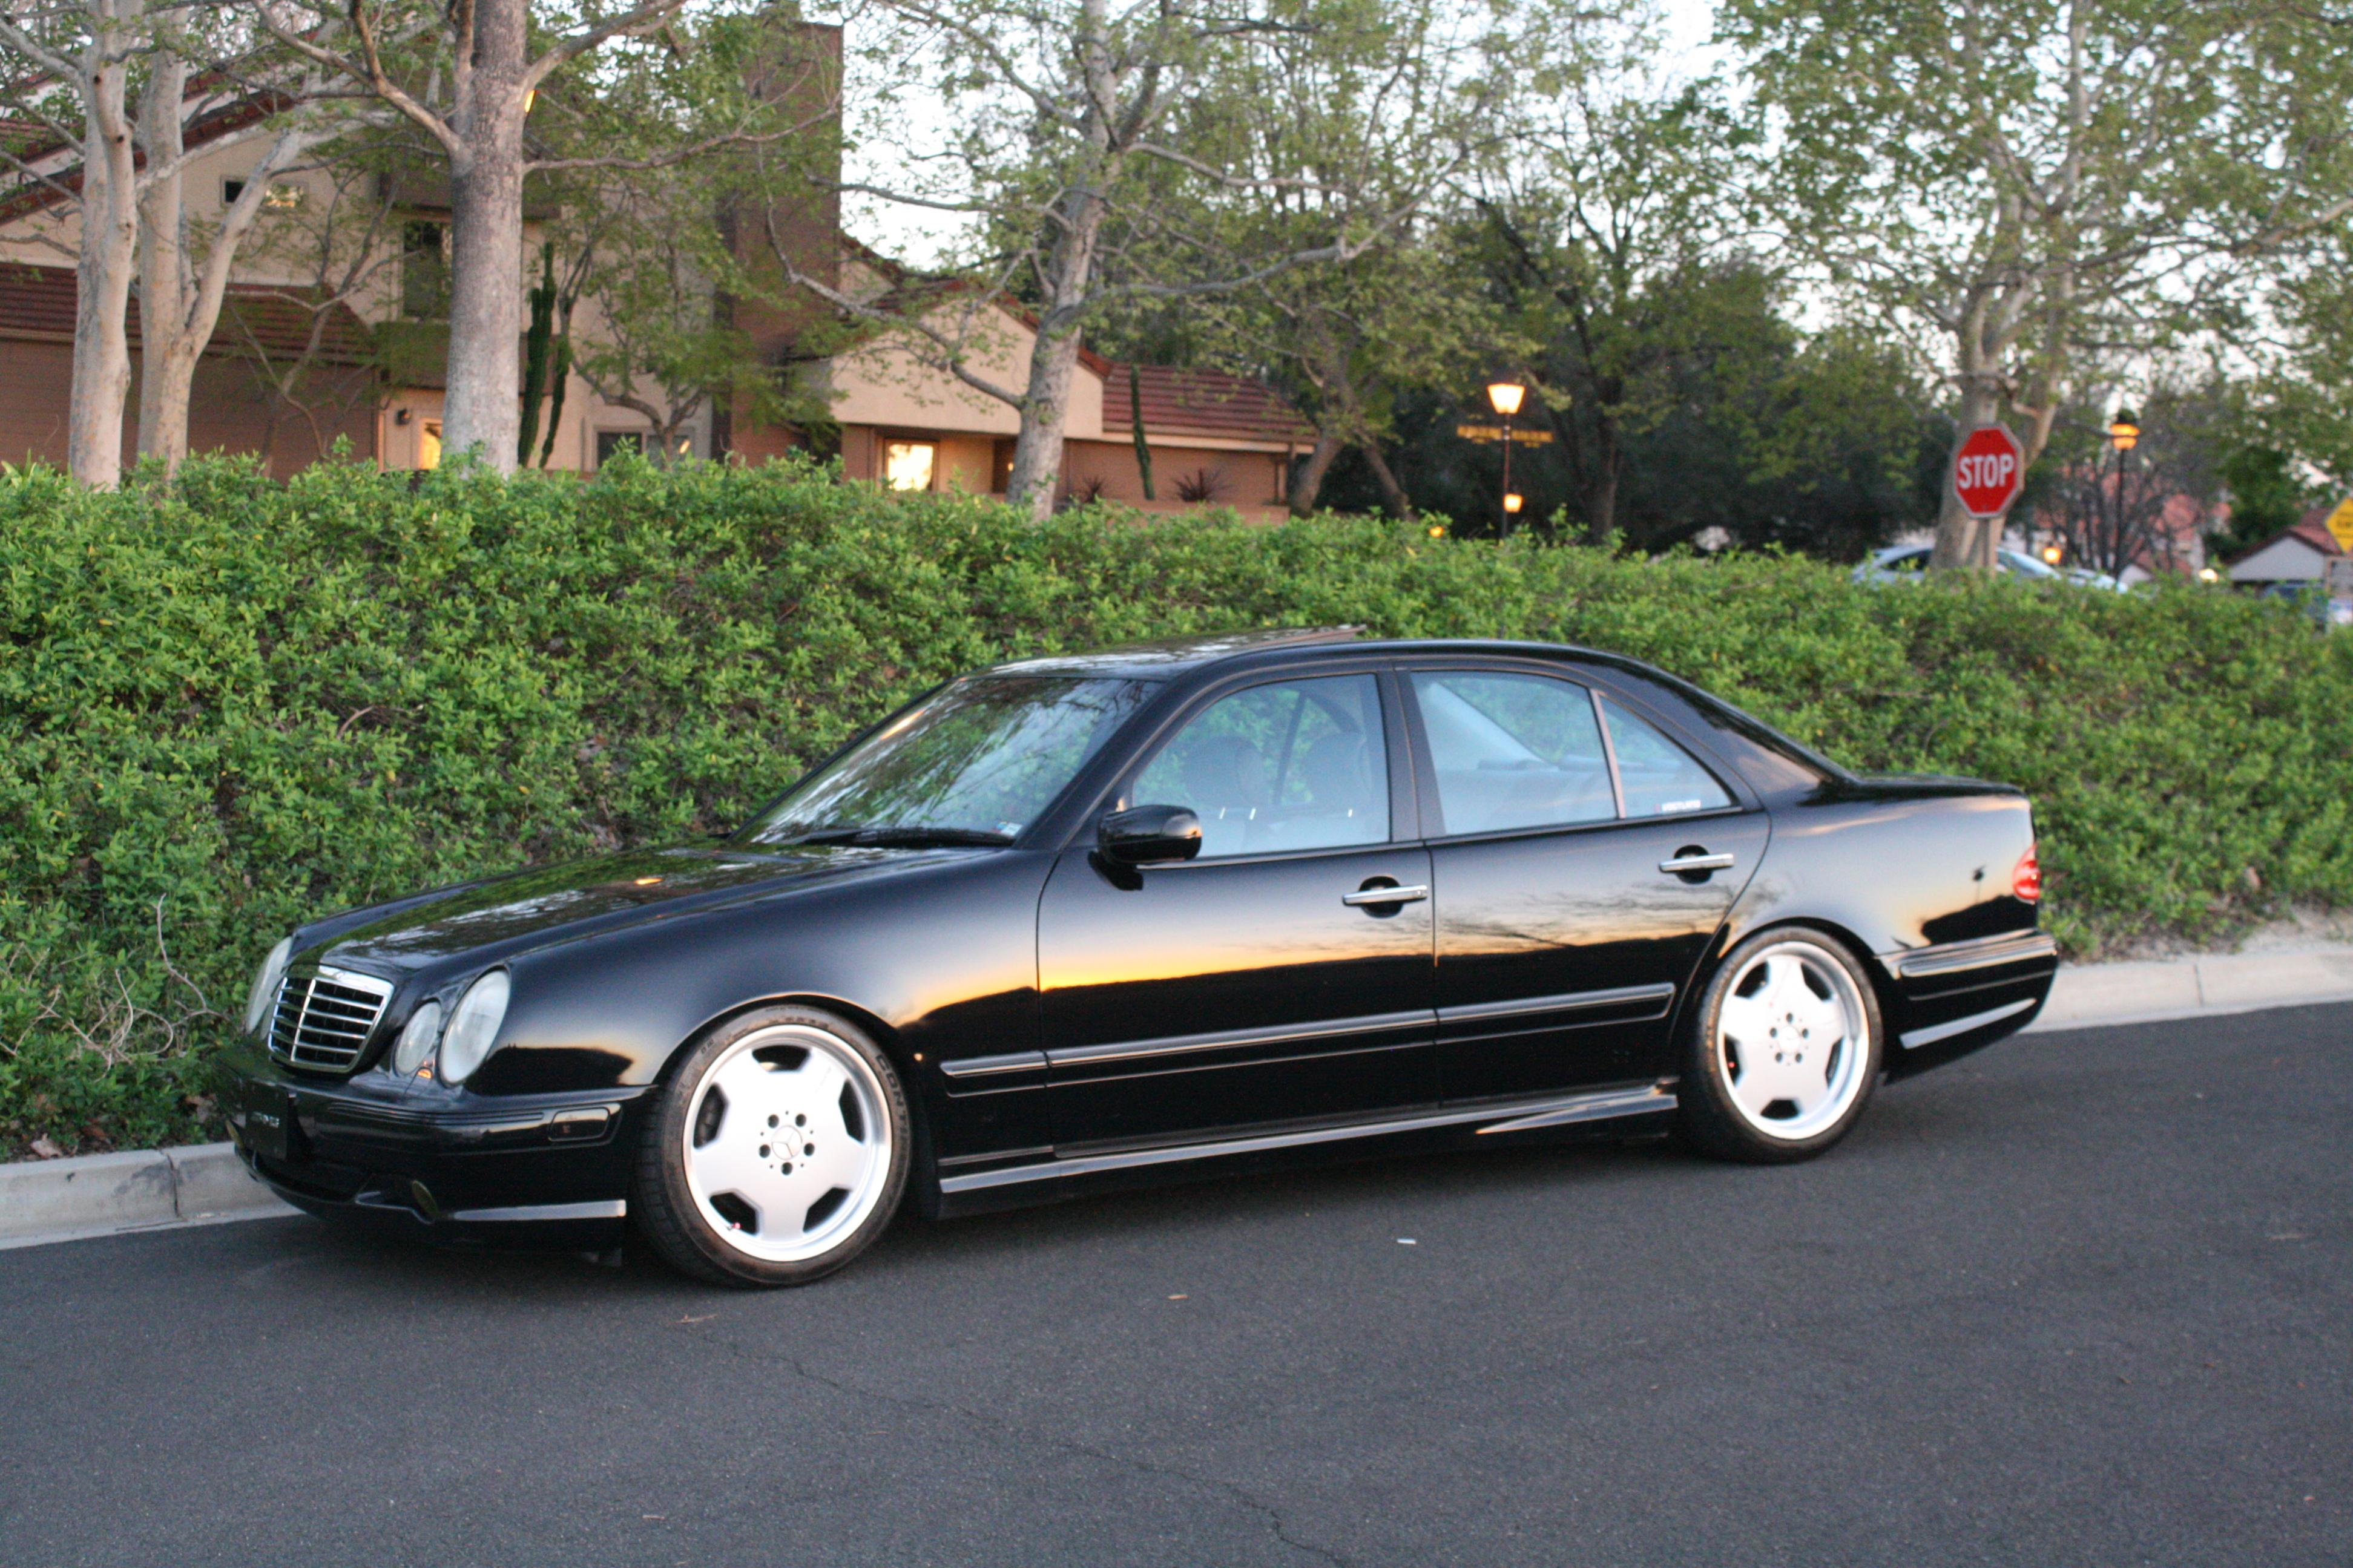 W210 Mercedes E55 AMG Project - Page 11 - MBWorld.org Forums